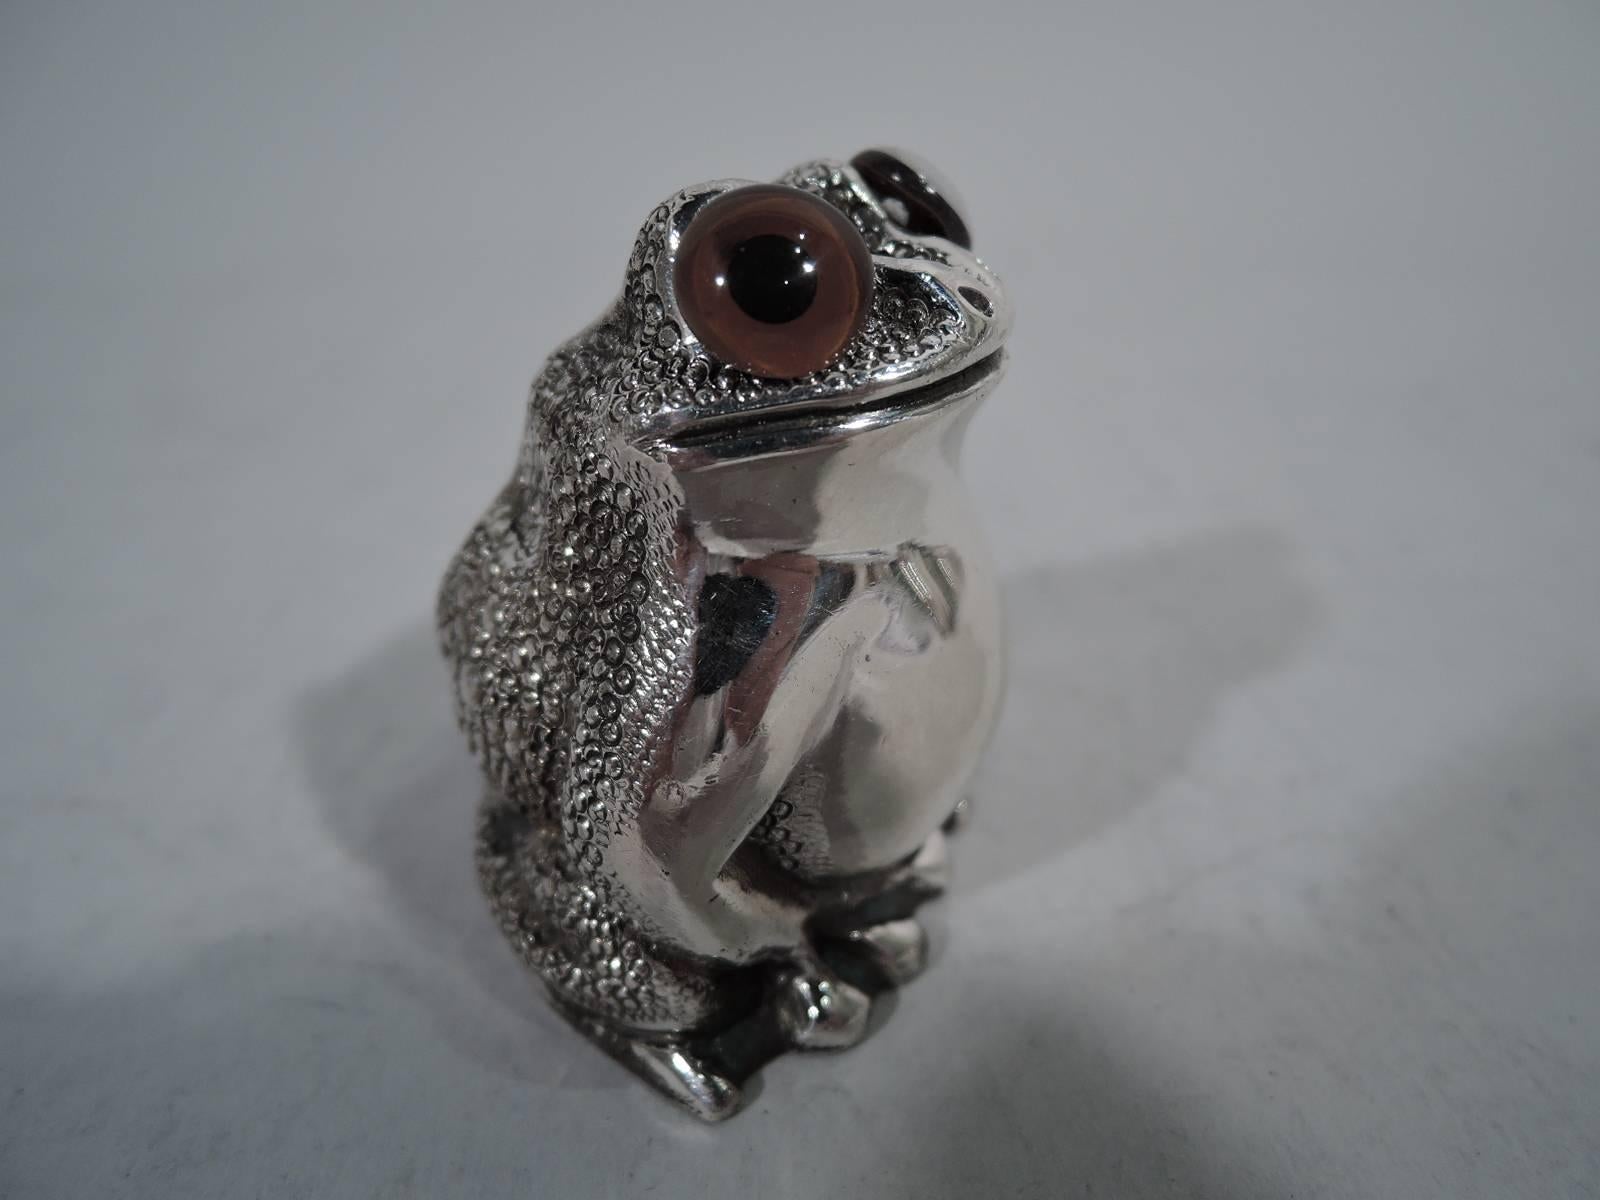 George VI sterling silver frog shaker. Made by Asprey in London in 1947. A squatting reptile with legs gathered close to body. Scaly back, smooth front, and intense glass exophthalmic eyes. Closed mouth set in smirking smile. A cute solo companion.